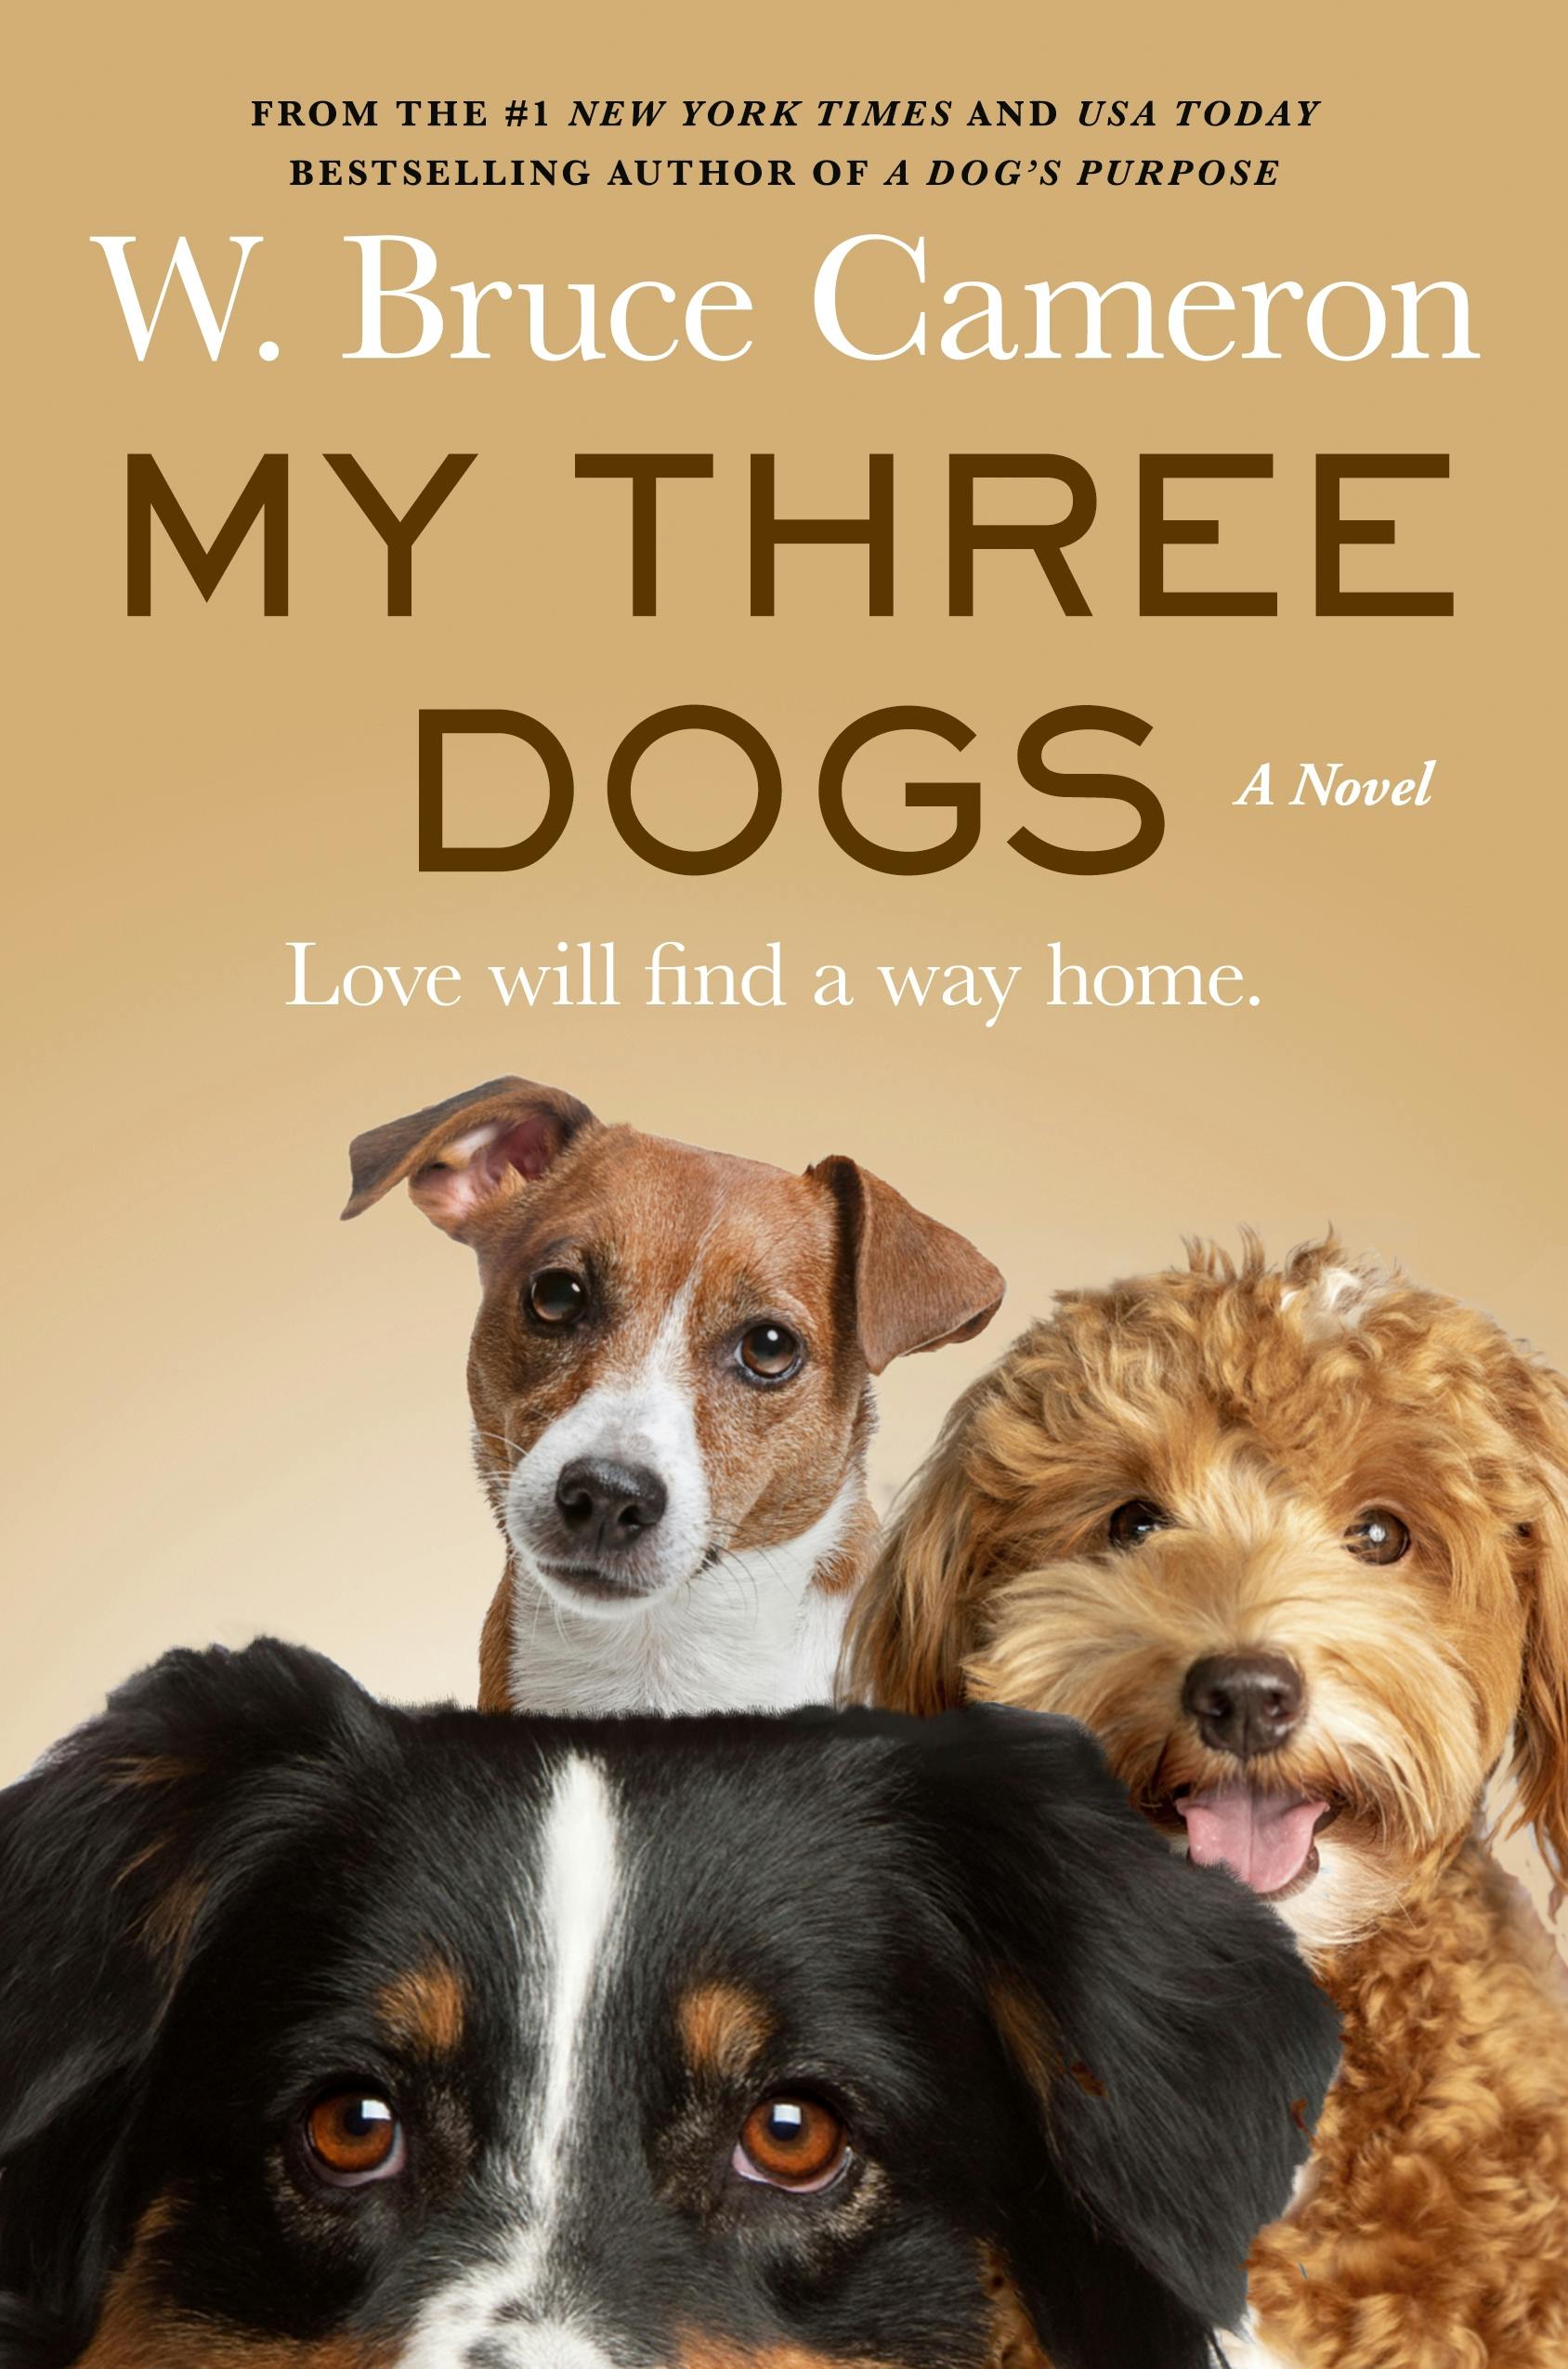 Cover for the book titled as: My Three Dogs